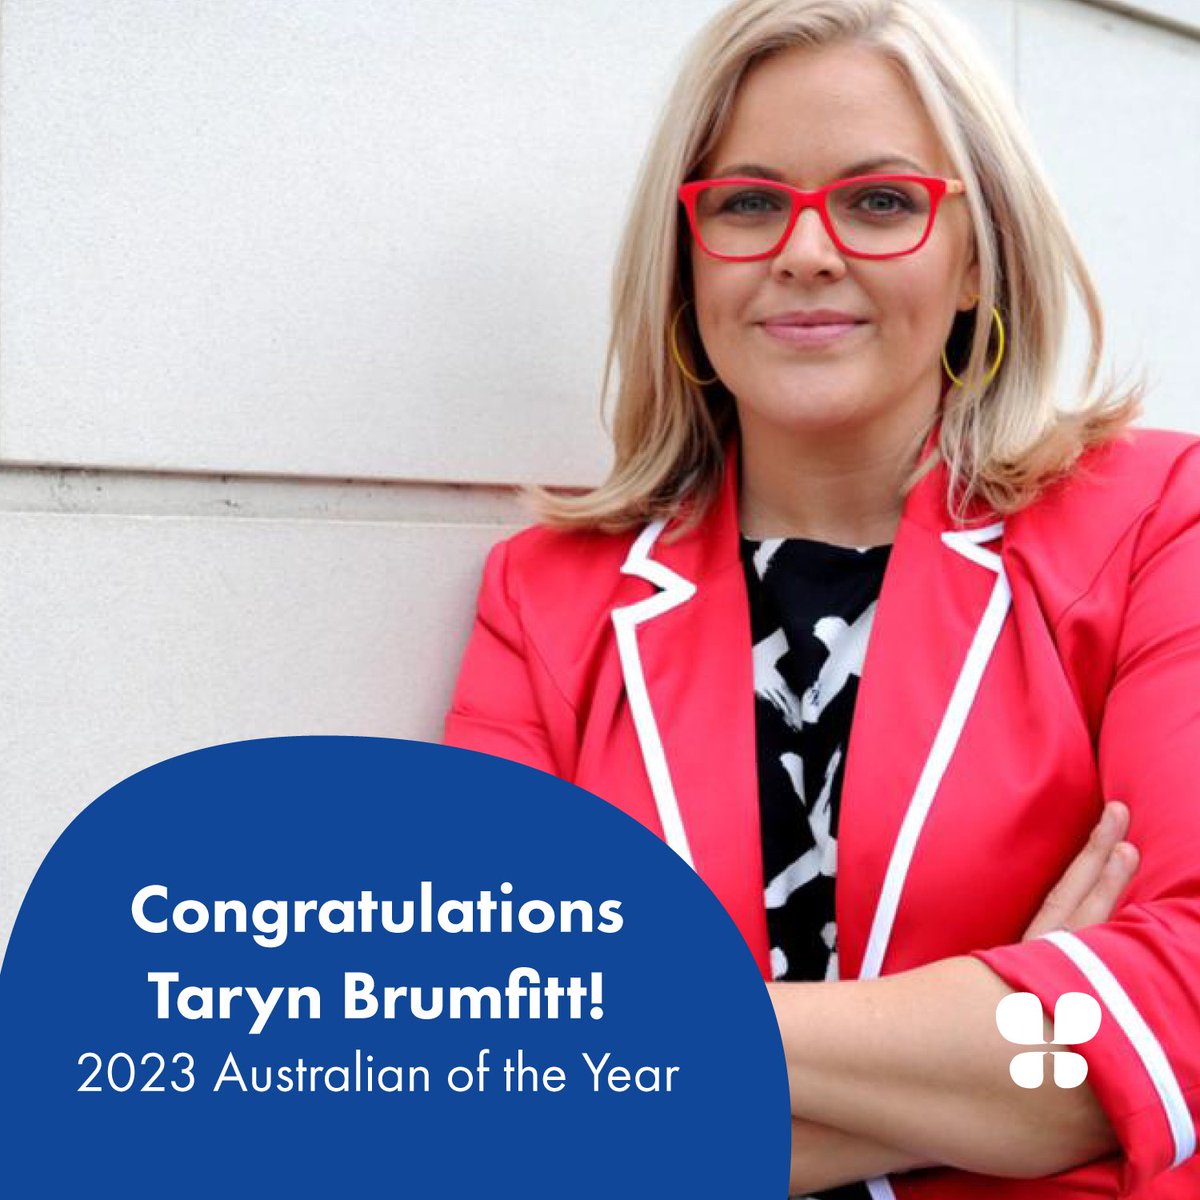 Congratulations to Taryn Brumfitt, who has been named the 2023 #AustralianOfTheYear! We thank Taryn for bringing  #bodyimage to national attention & we hope this will ensure every Australian who is impacted by negative body image can access the support they deserve.